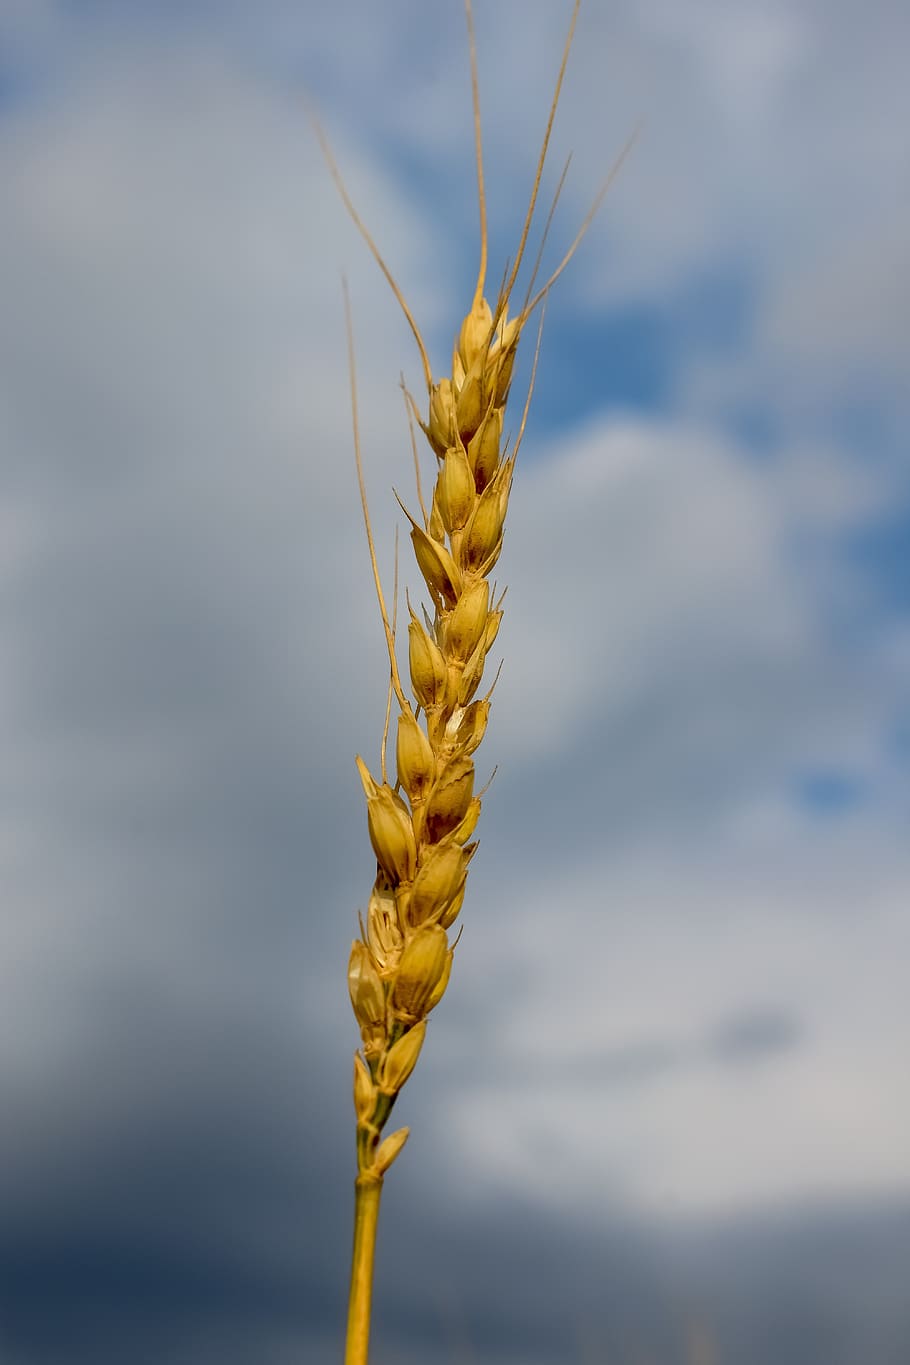 barley, plant, agriculture, wheat, cereals, nature, food, spring, cloud - sky, close-up